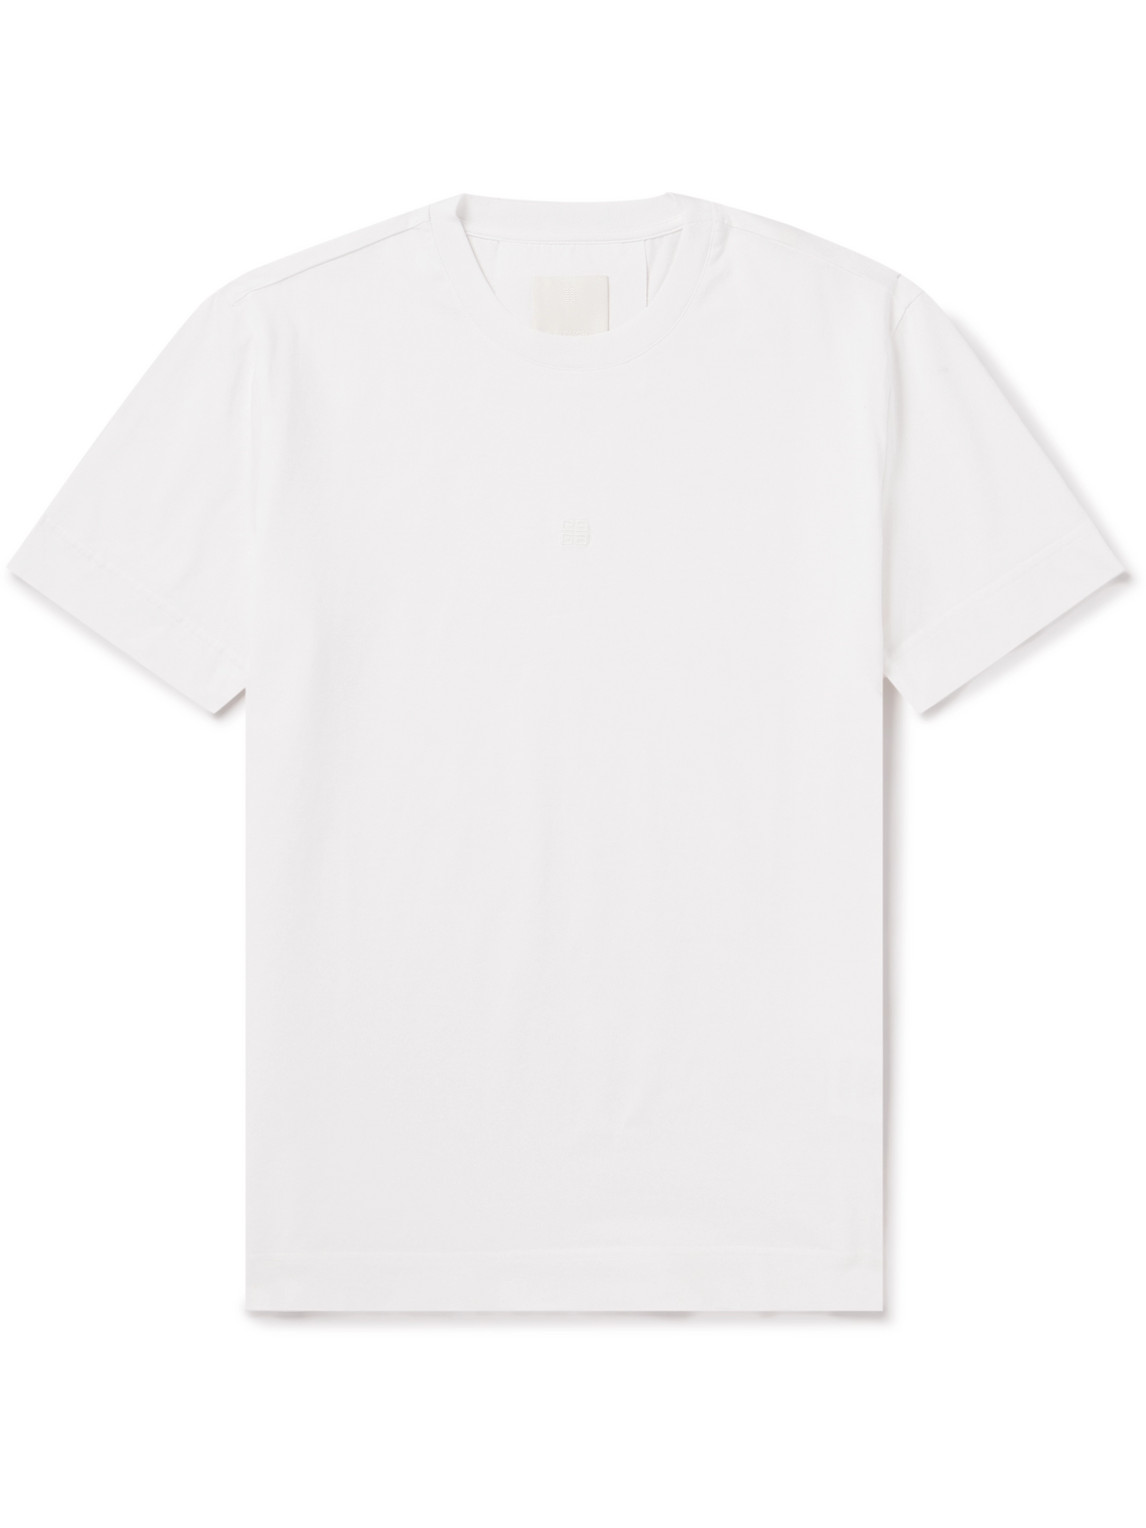 Givenchy - Logo-Embroidered Cotton-Jersey T-Shirt - Men - White - L von Givenchy